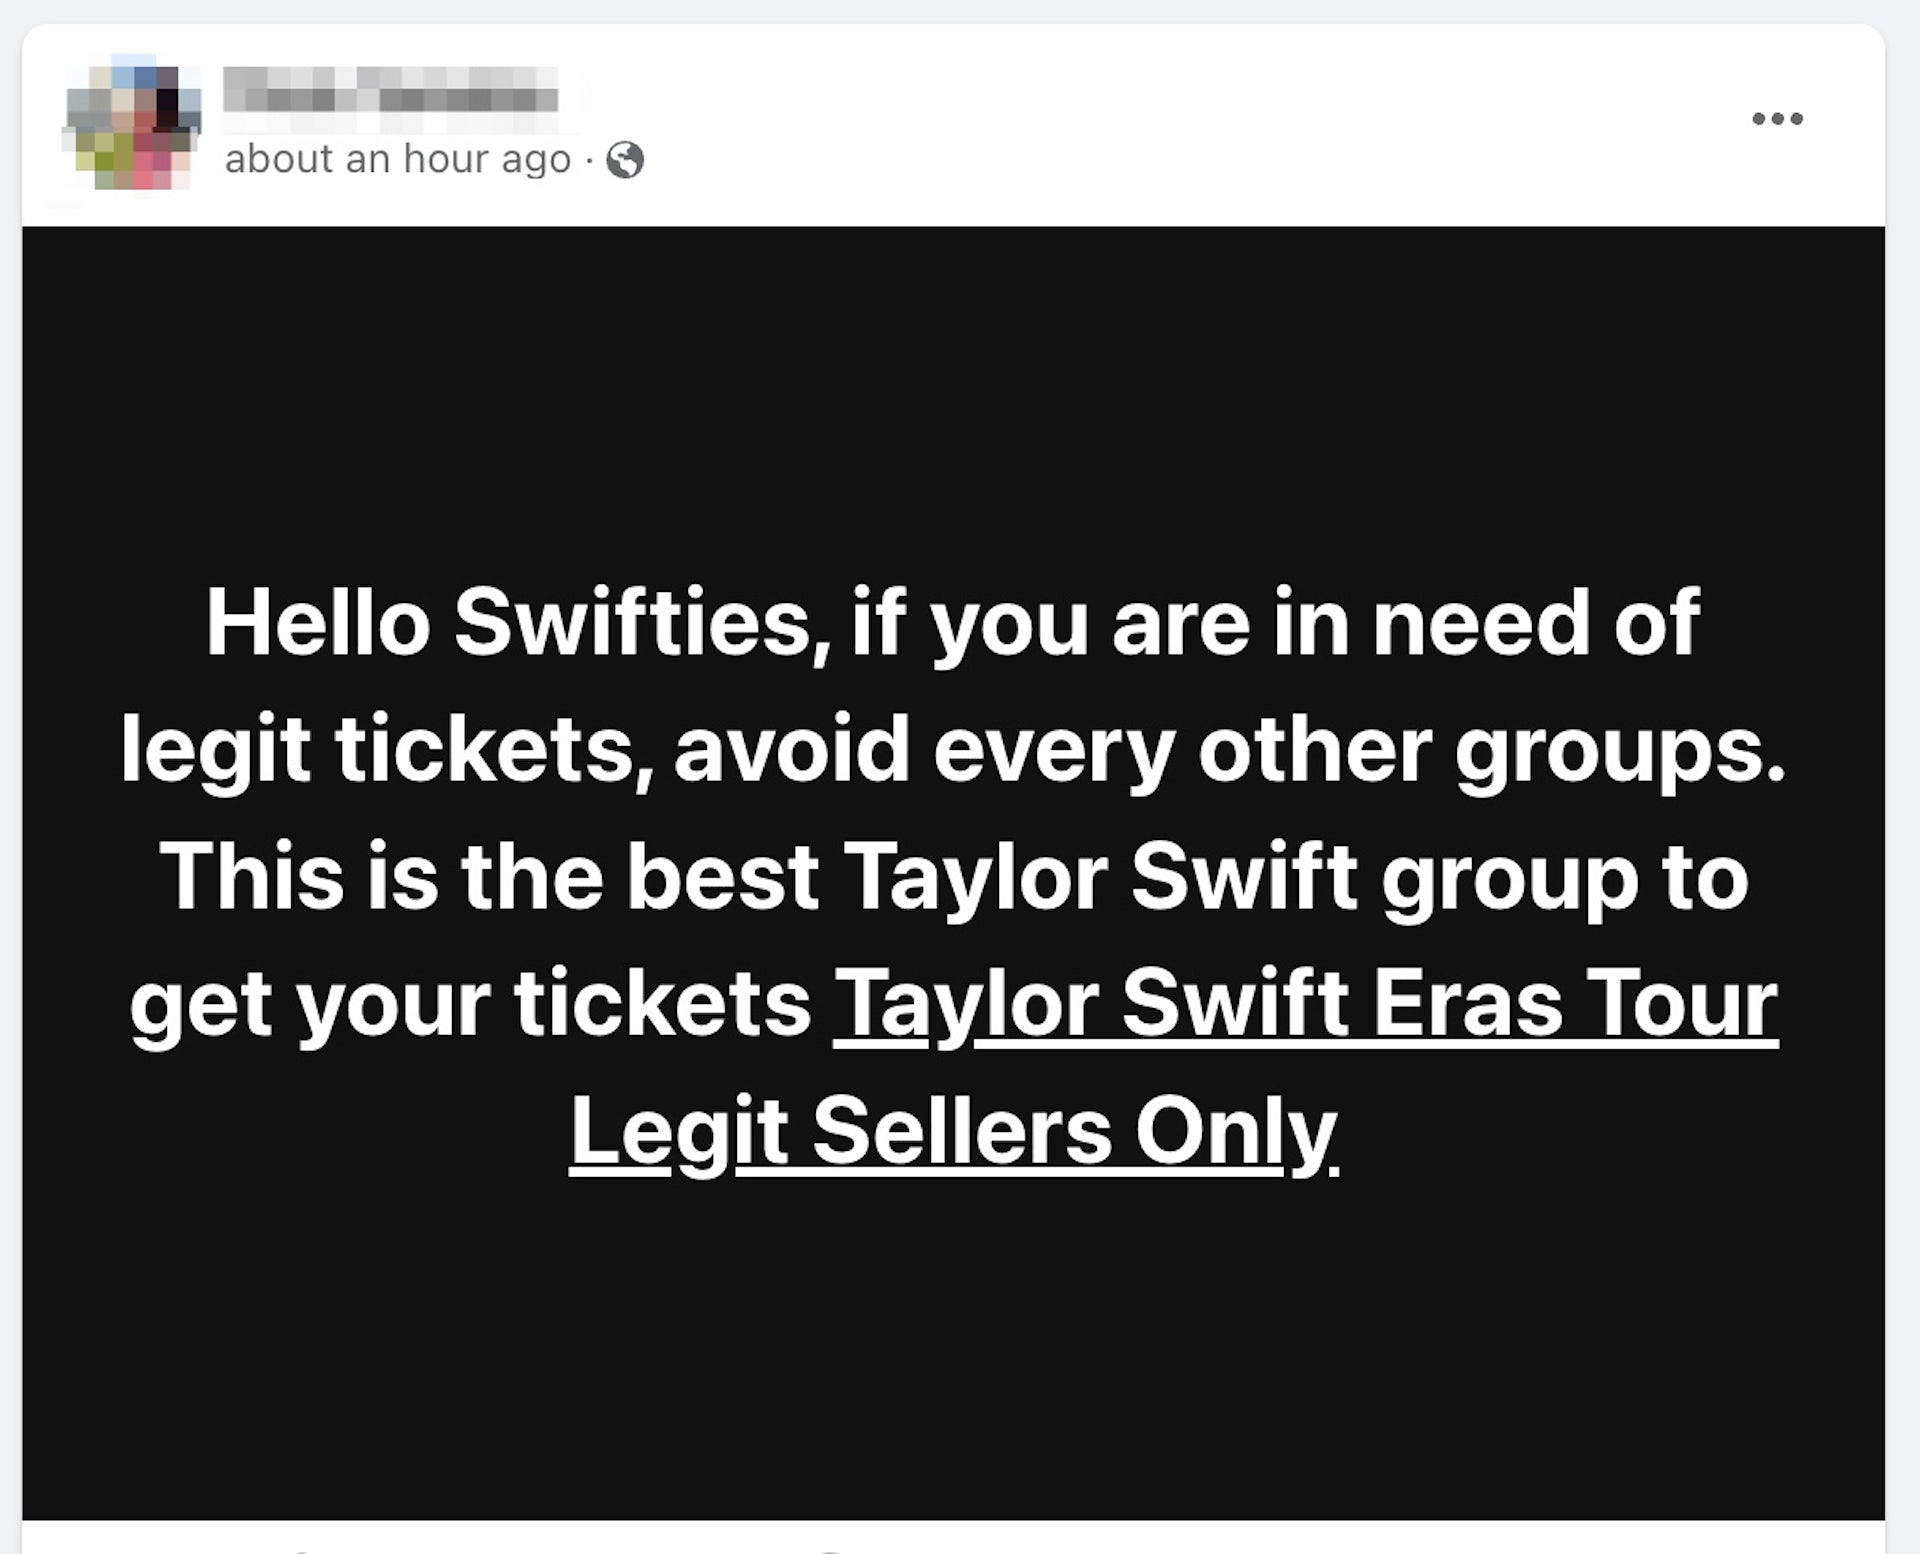 Looking for Taylor Swift tickets? Follow these cybersecurity tips to avoid scams